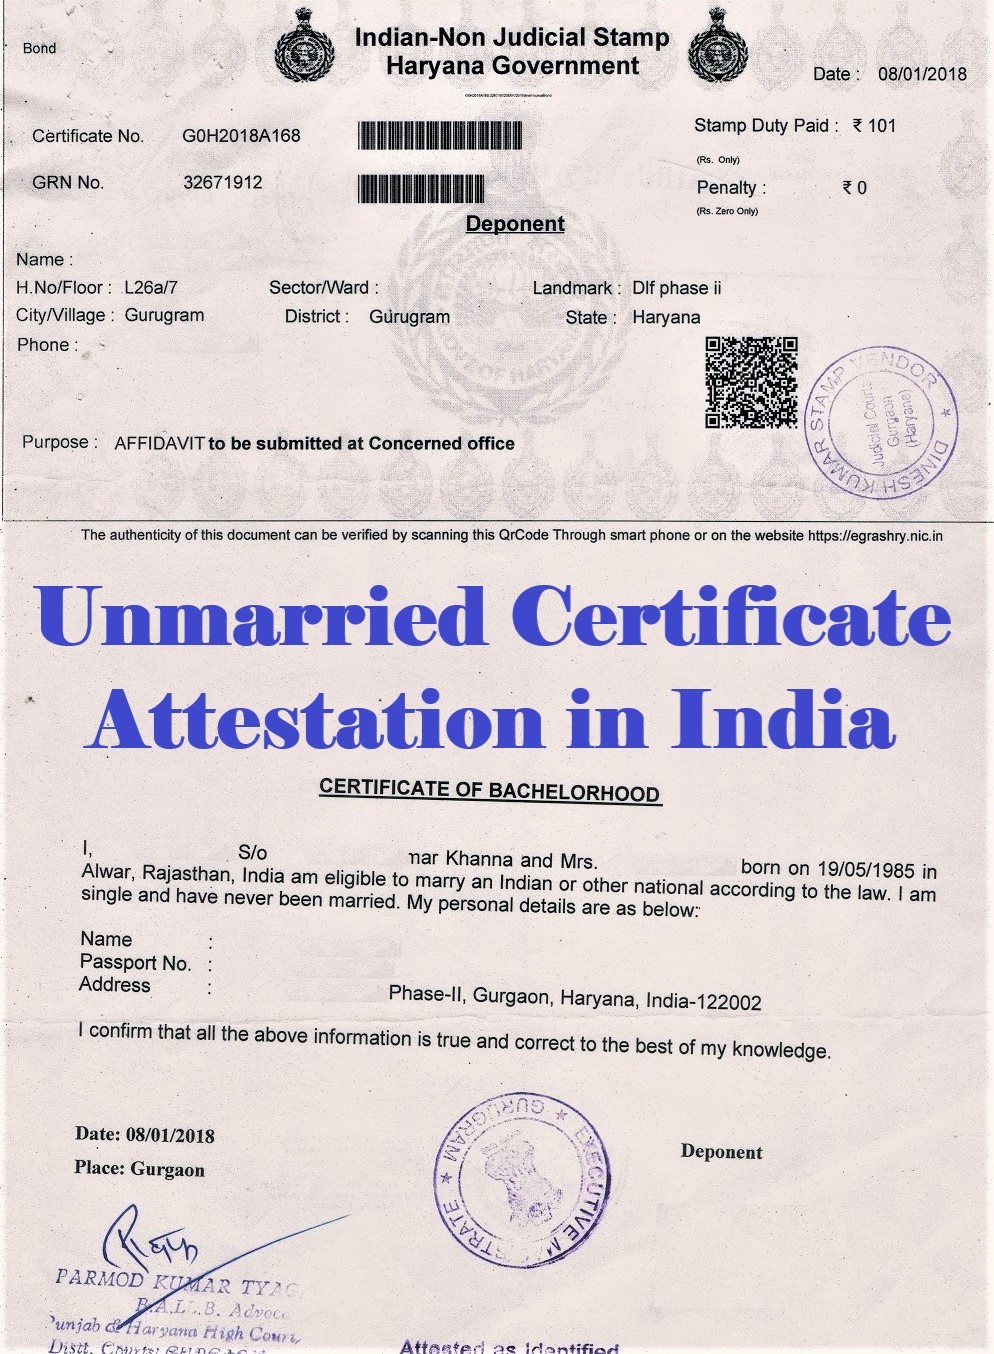 Unmarried Certificate Attestation from Belize Embassy